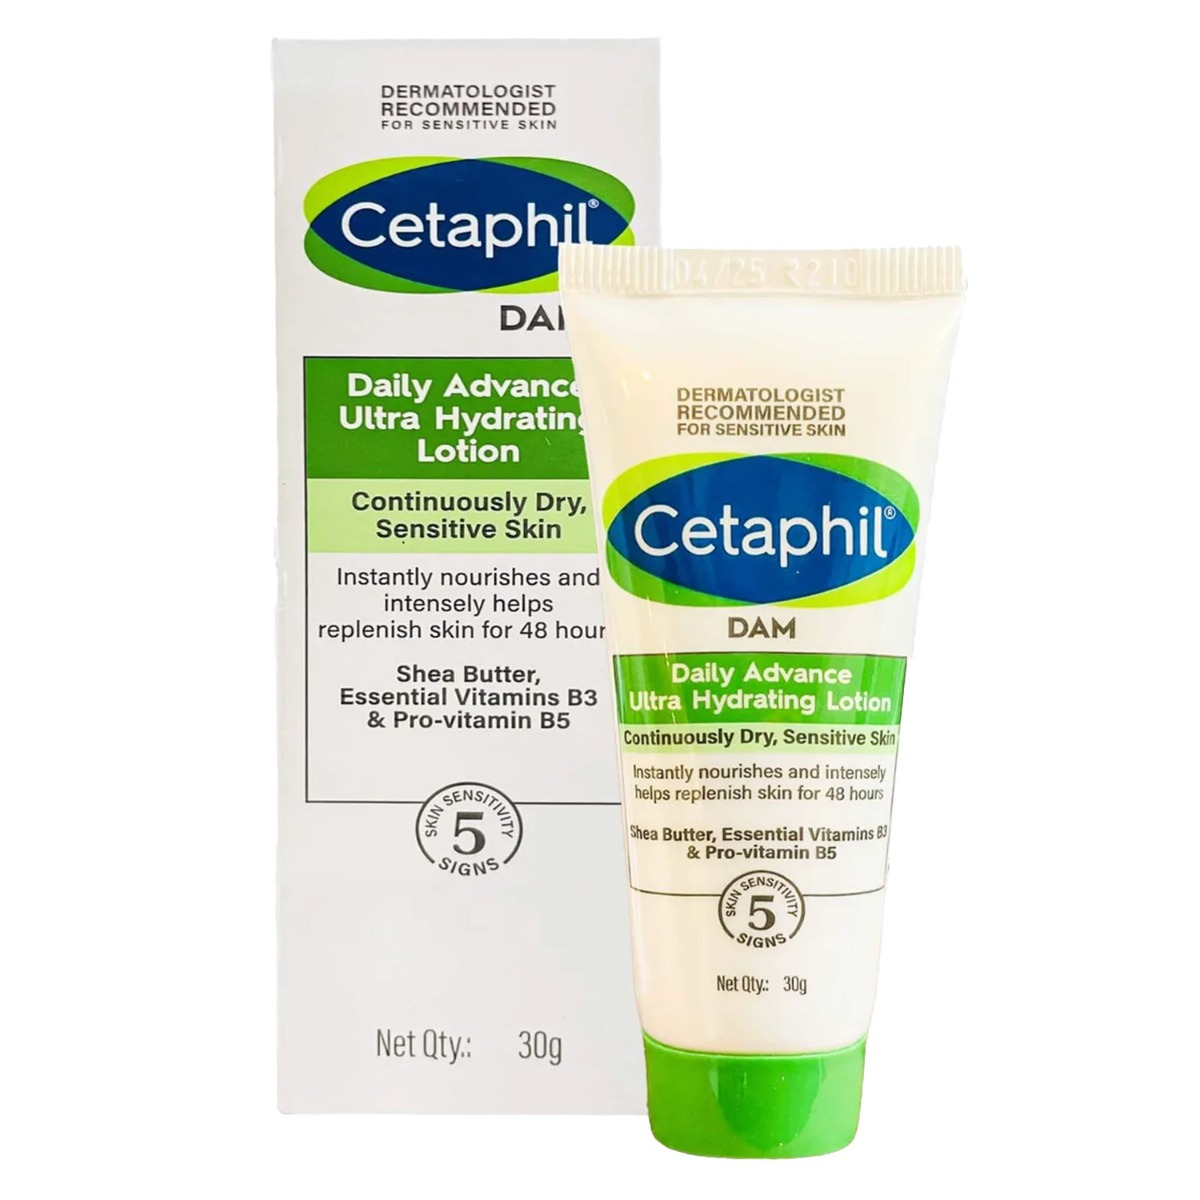 Cetaphil DAM Daily Advance Ultra Hydrating Lotion For Continuously Dry And Sensitive Skin, 30gm